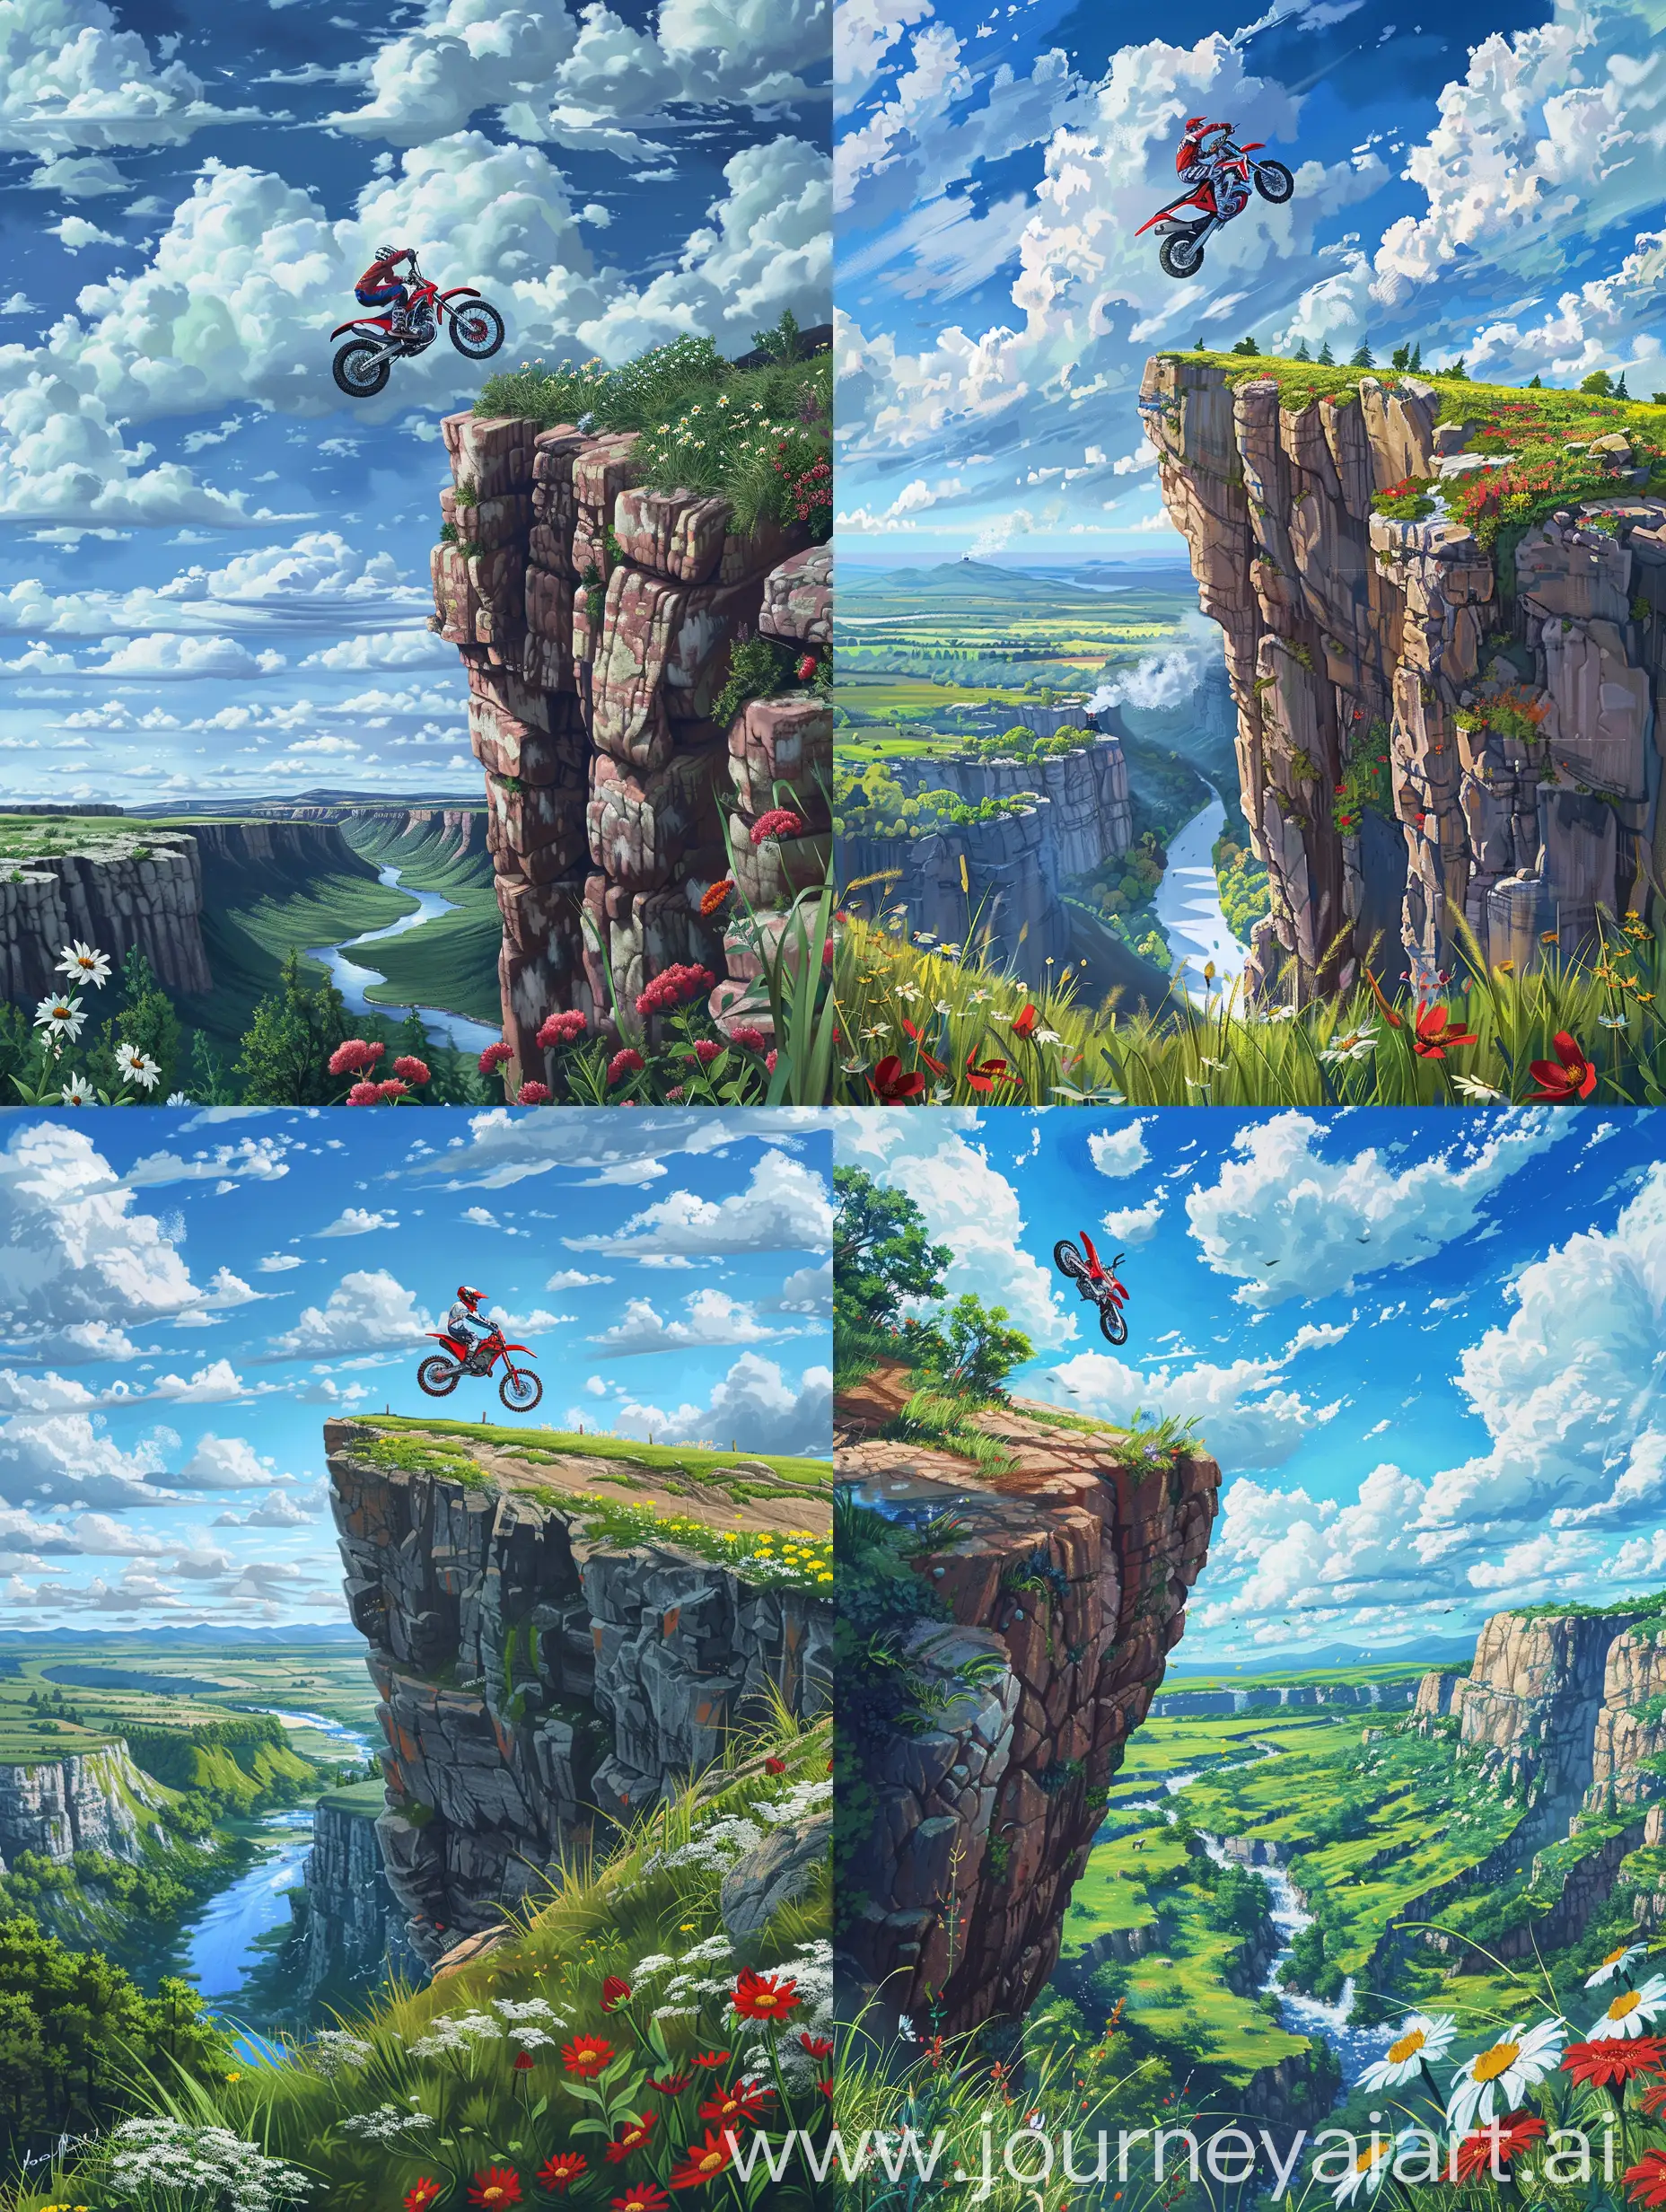 Realistic painting of a high cliff,in mid air there is a red dirtbike going to other cliff,below is a far river,anime style of fluffy white clouds,drone shot,wide angle,grasses,vivid flowers